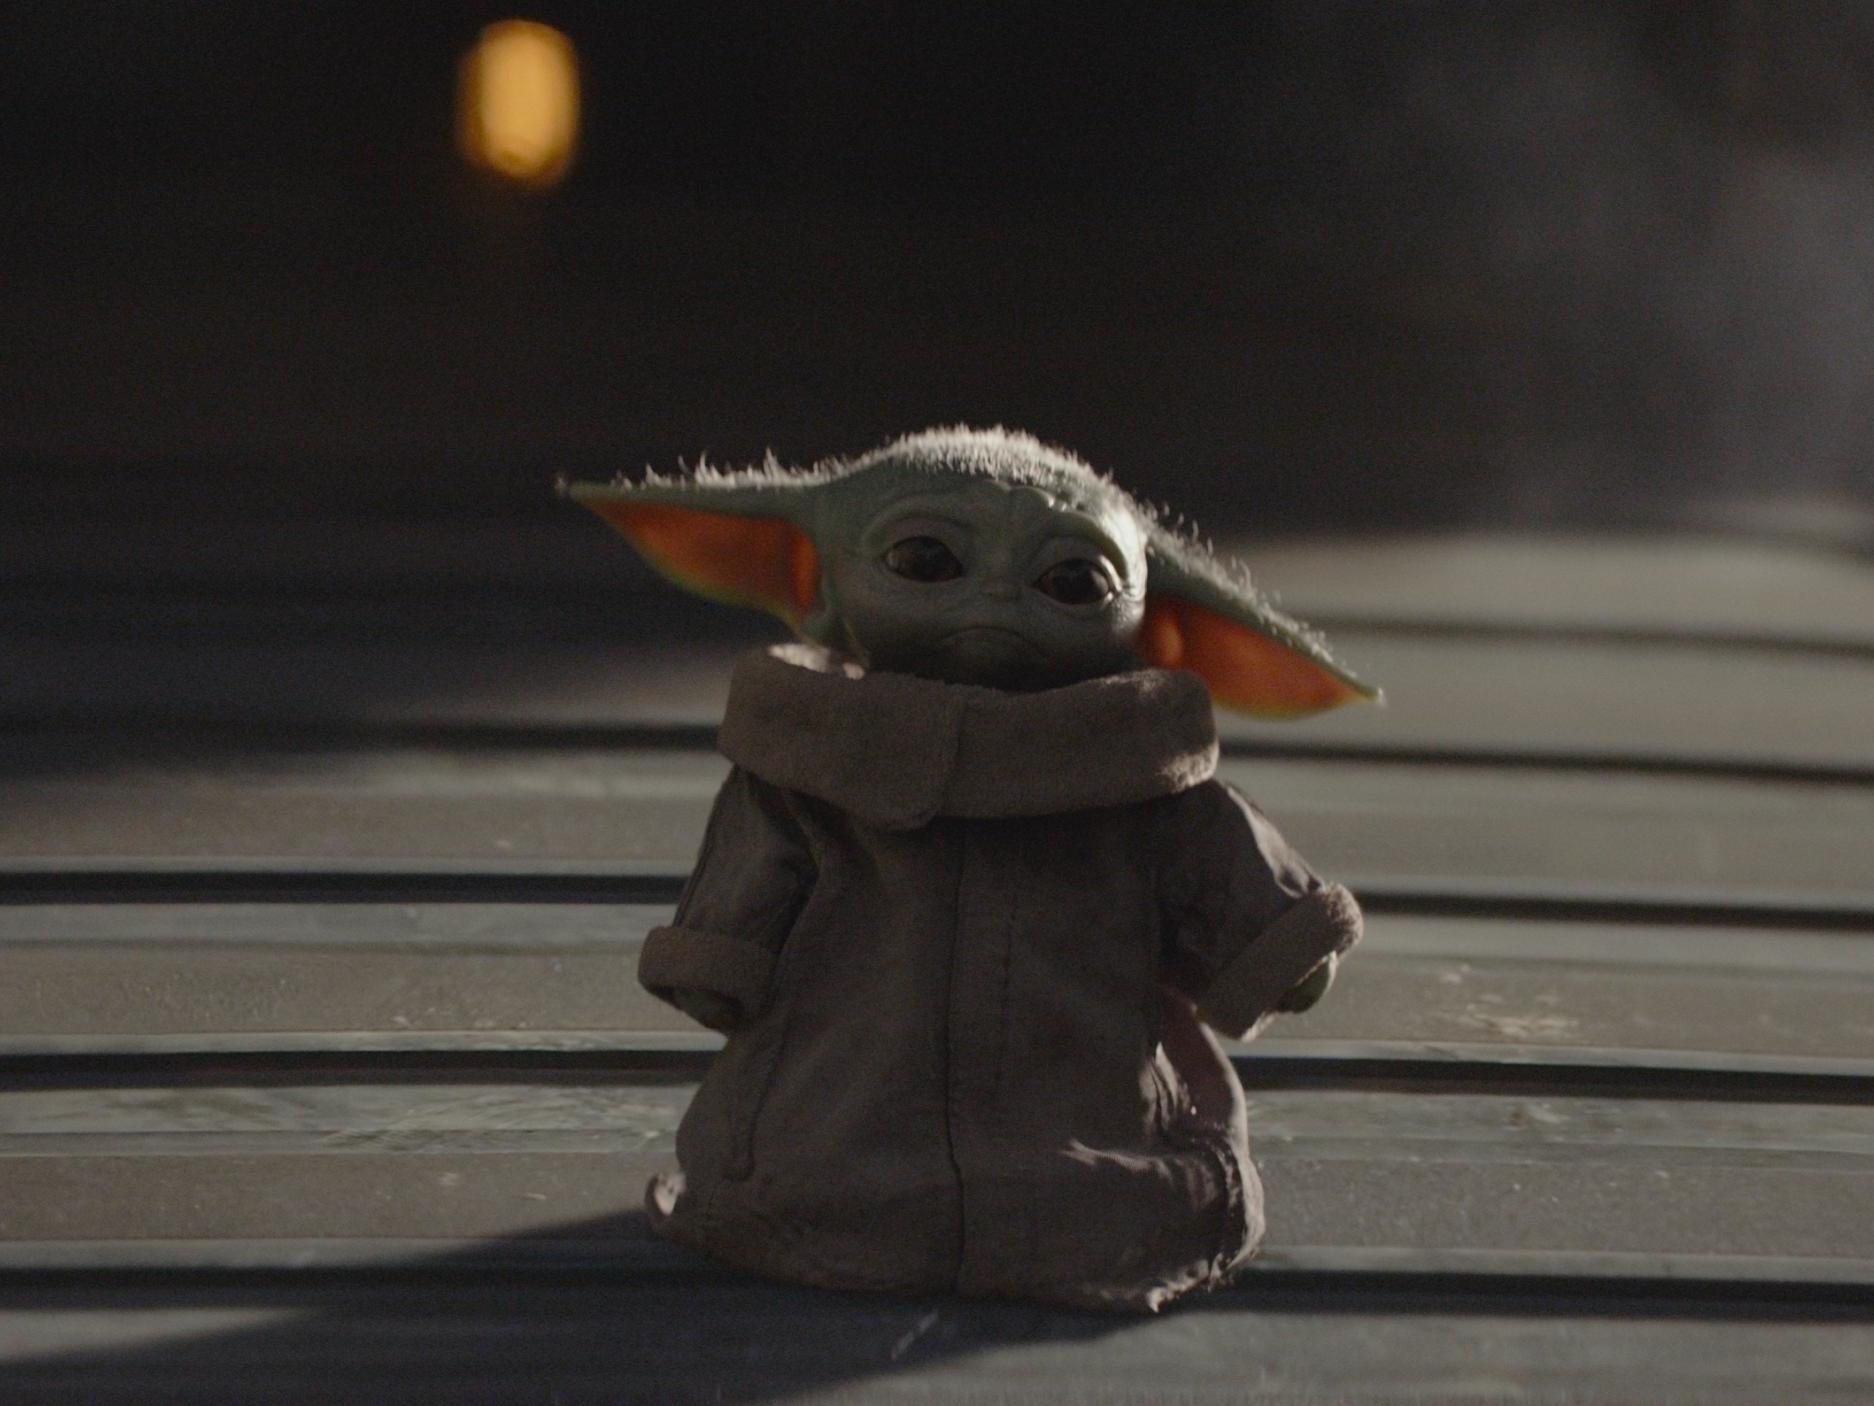 This animatronic Baby Yoda puppet looks like it's alive